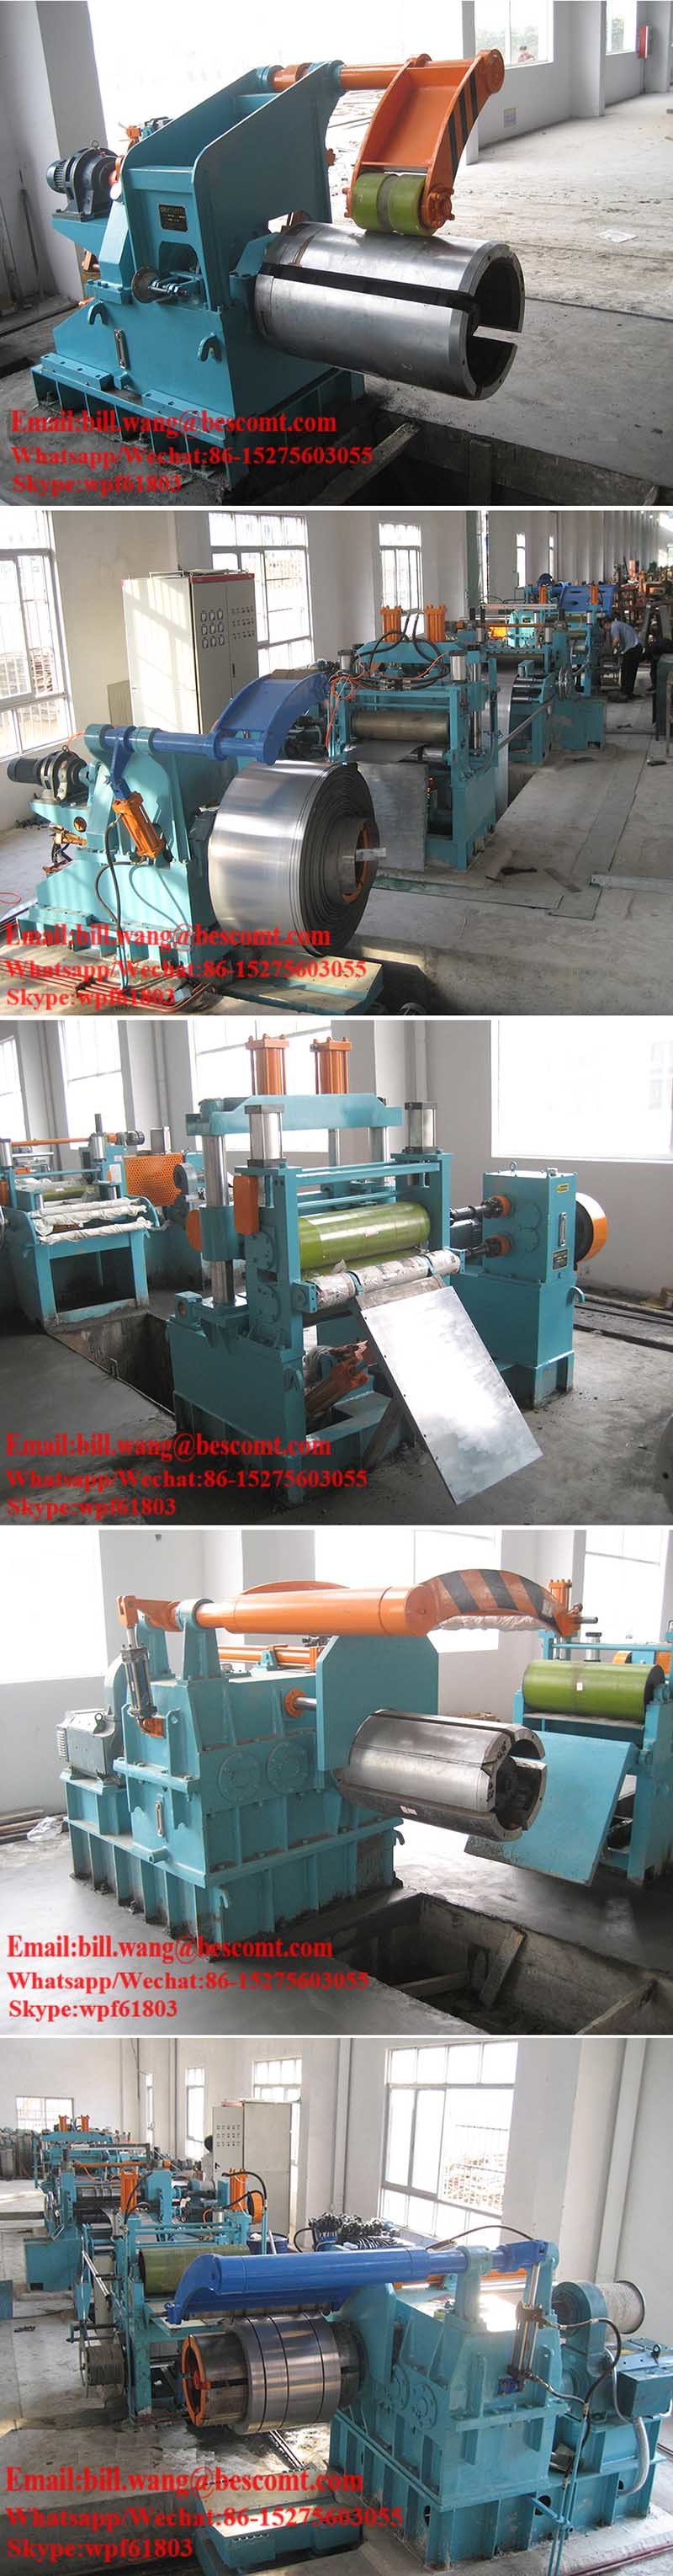  Stainless Steel Metal Slitting Production Line 